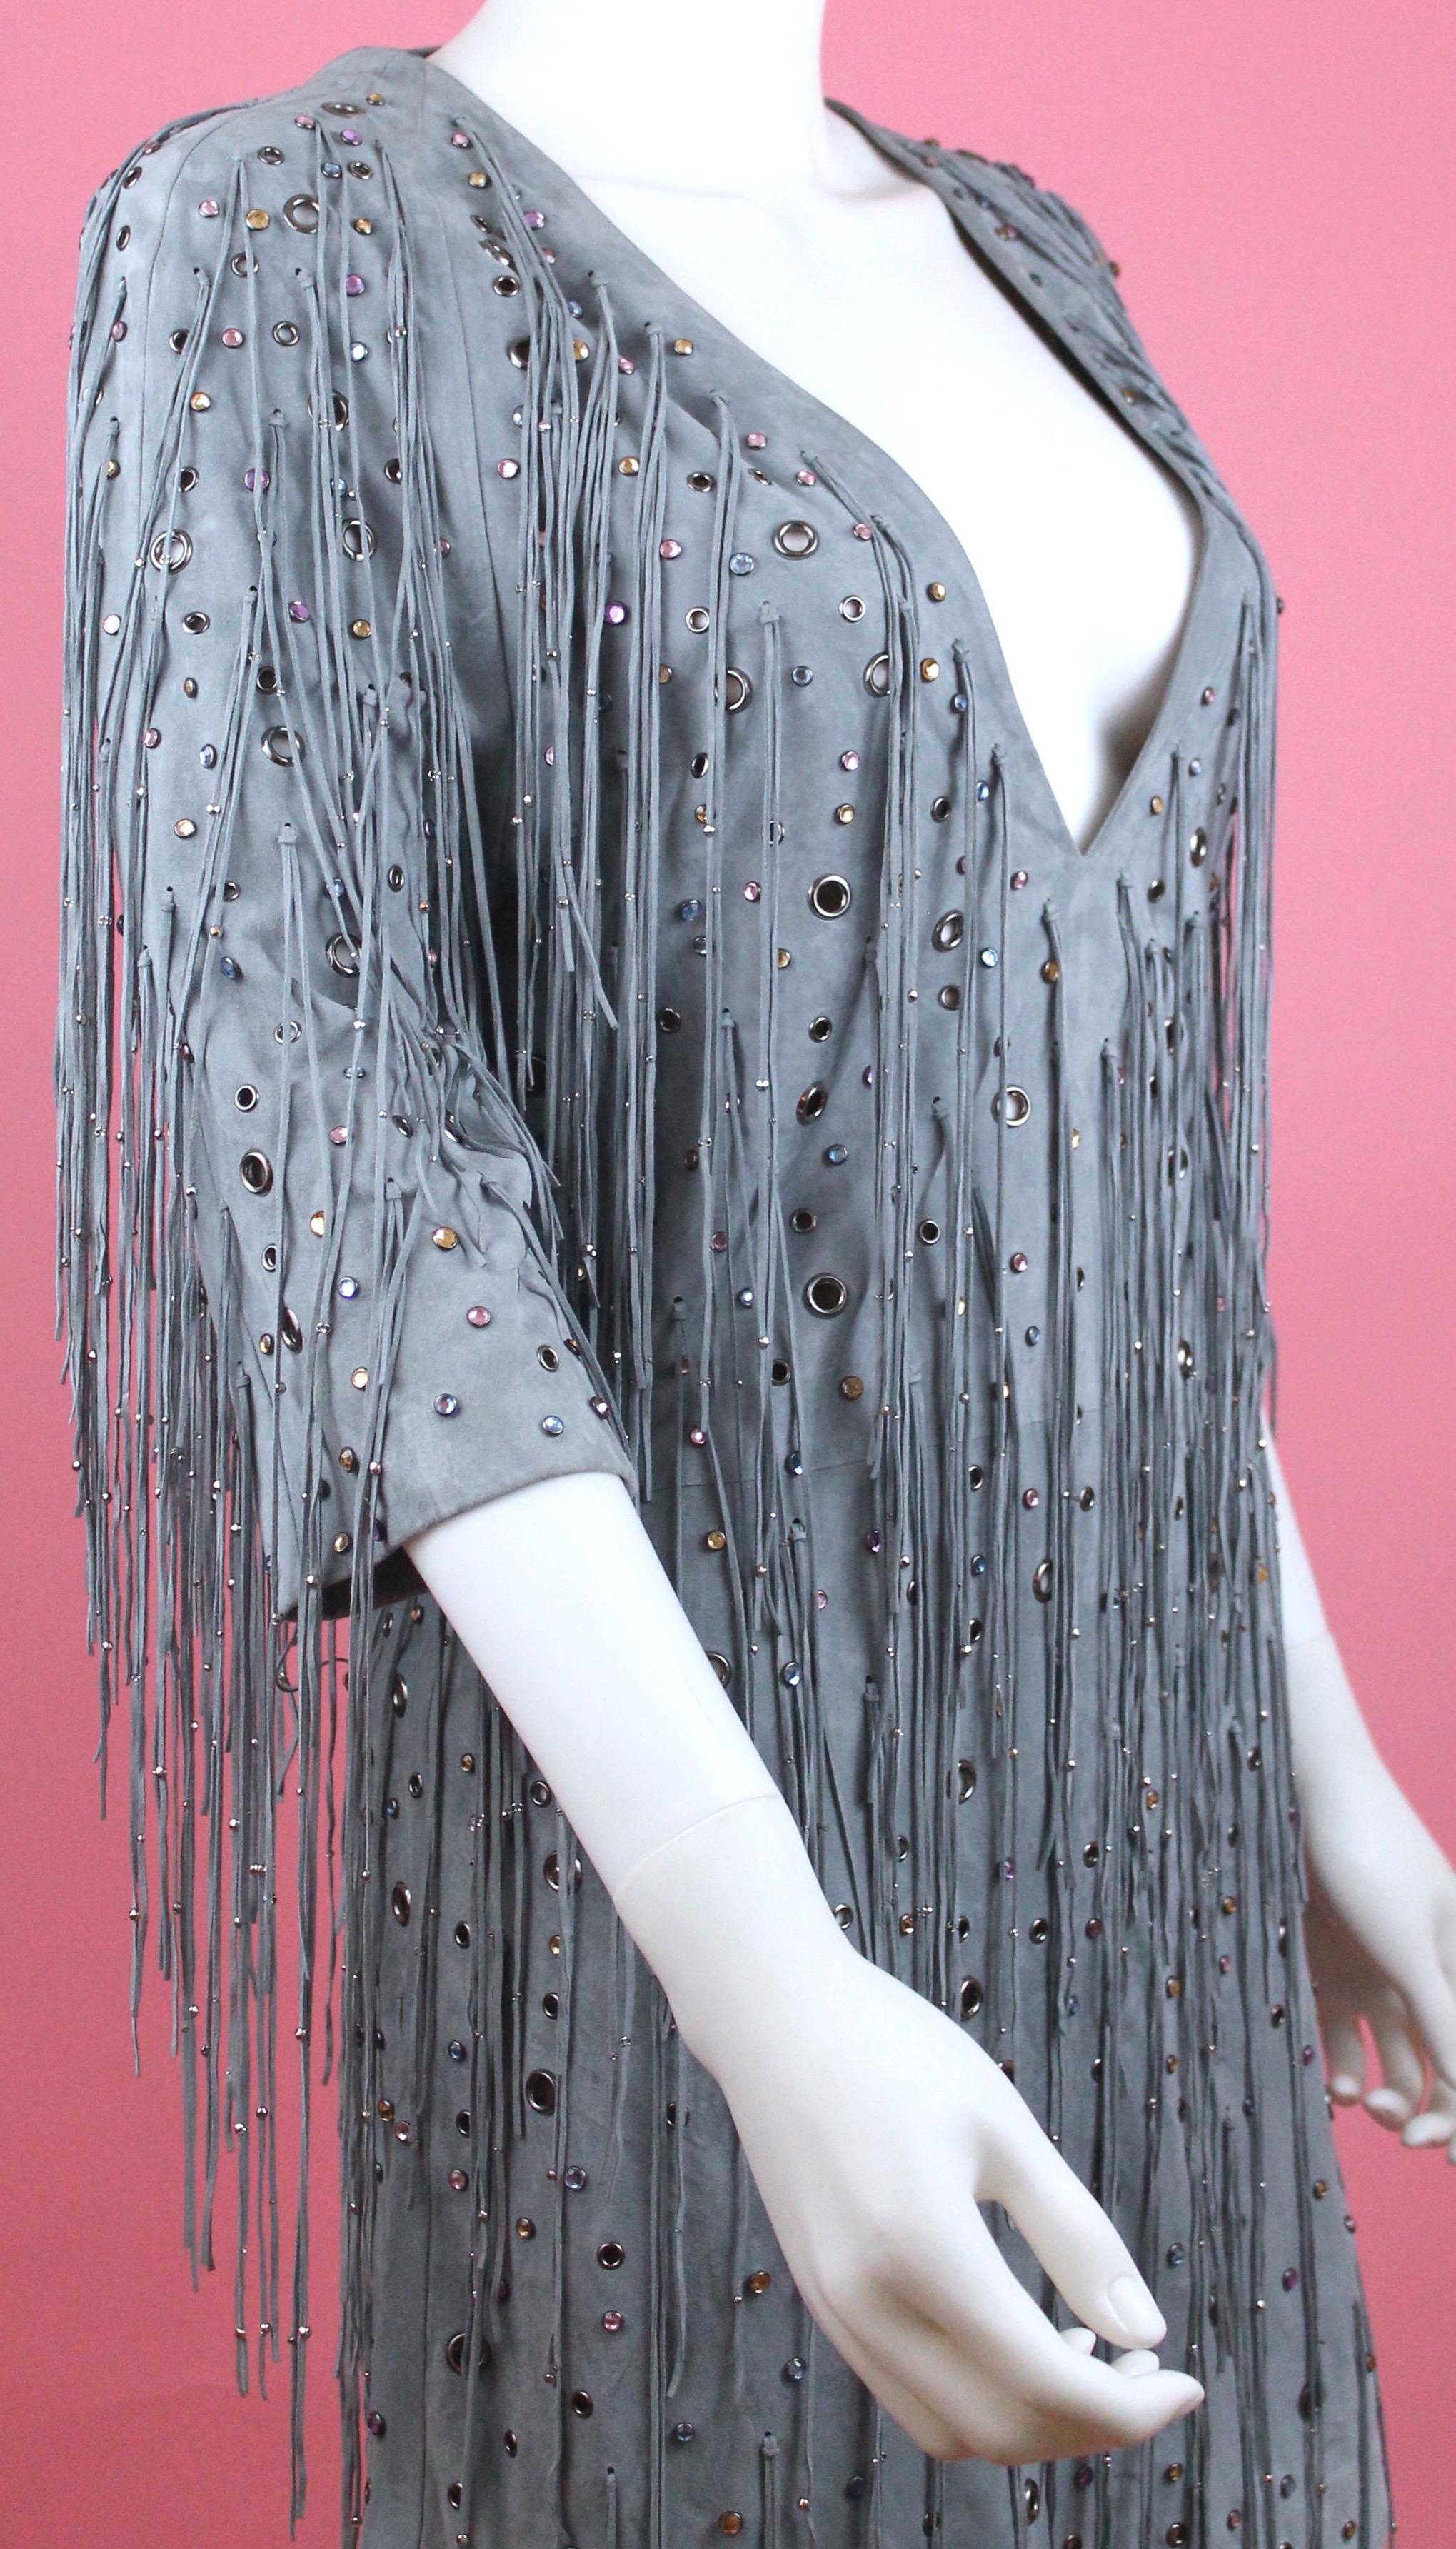 Bottega Veneta Arctic Suede Fringe Dress, SS 18, Size 4 In Excellent Condition For Sale In Los Angeles, CA